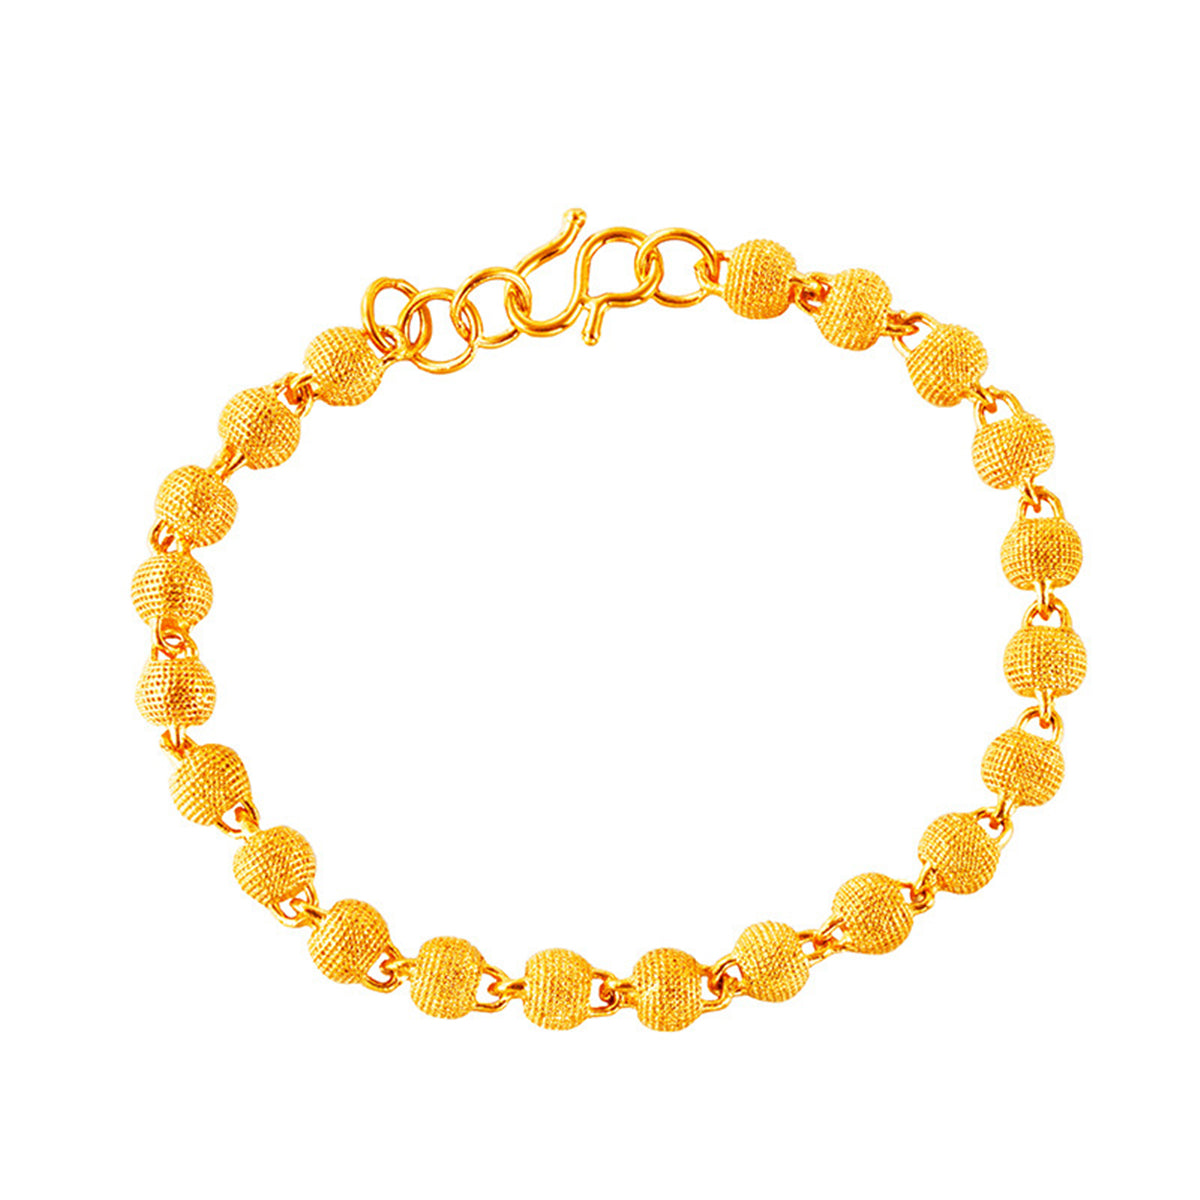 24K Gold-Plated Frosted Bead Bracelet